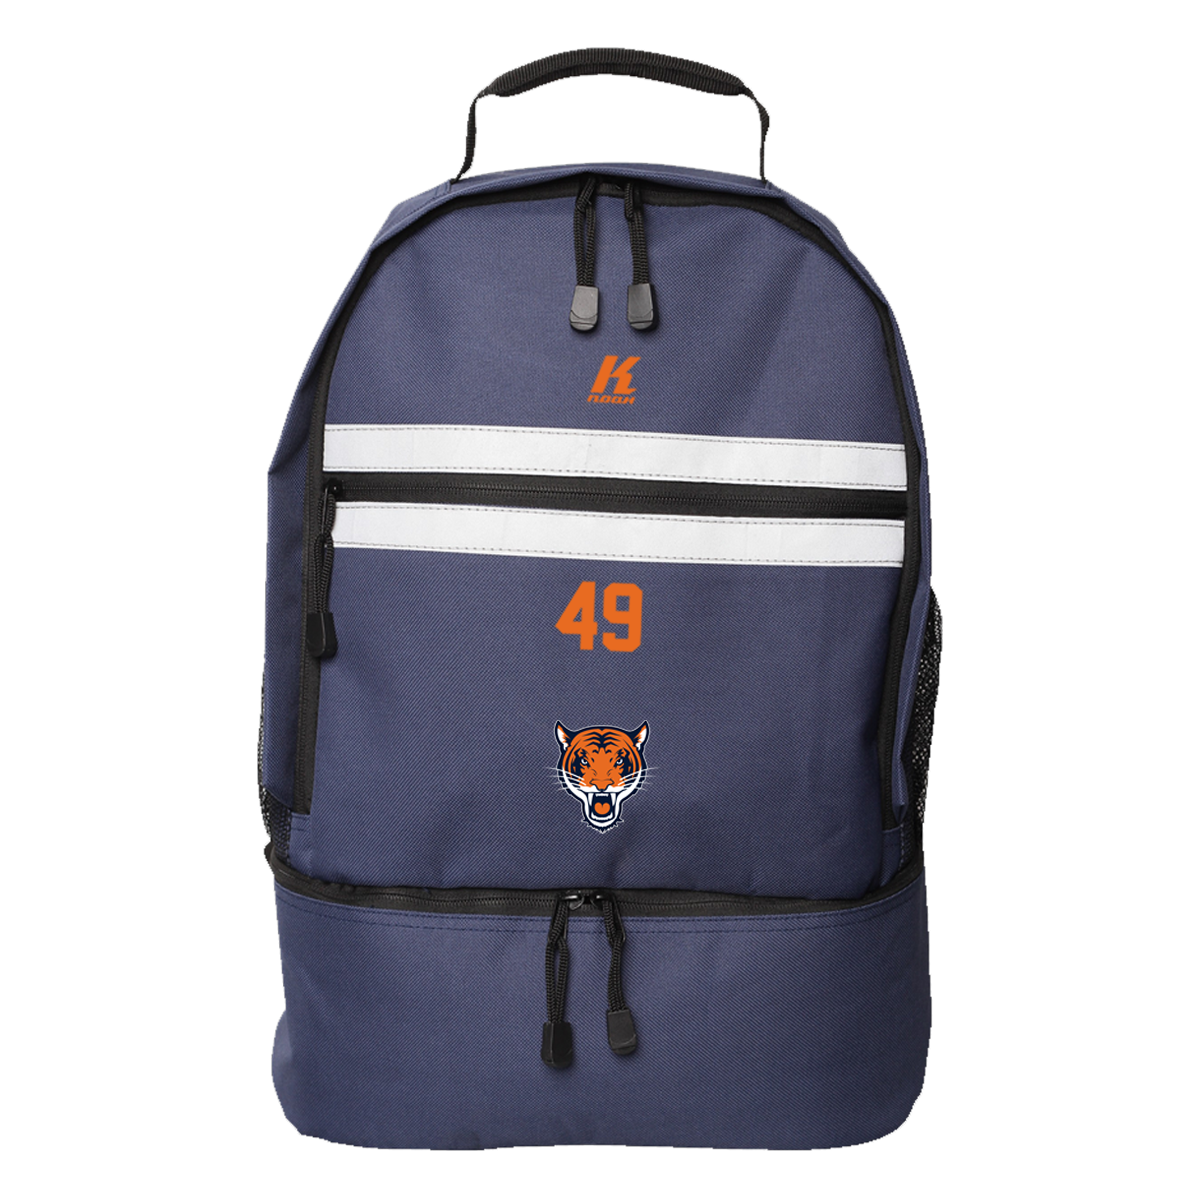 Tigers Players Backpack with Playernumber or Initials